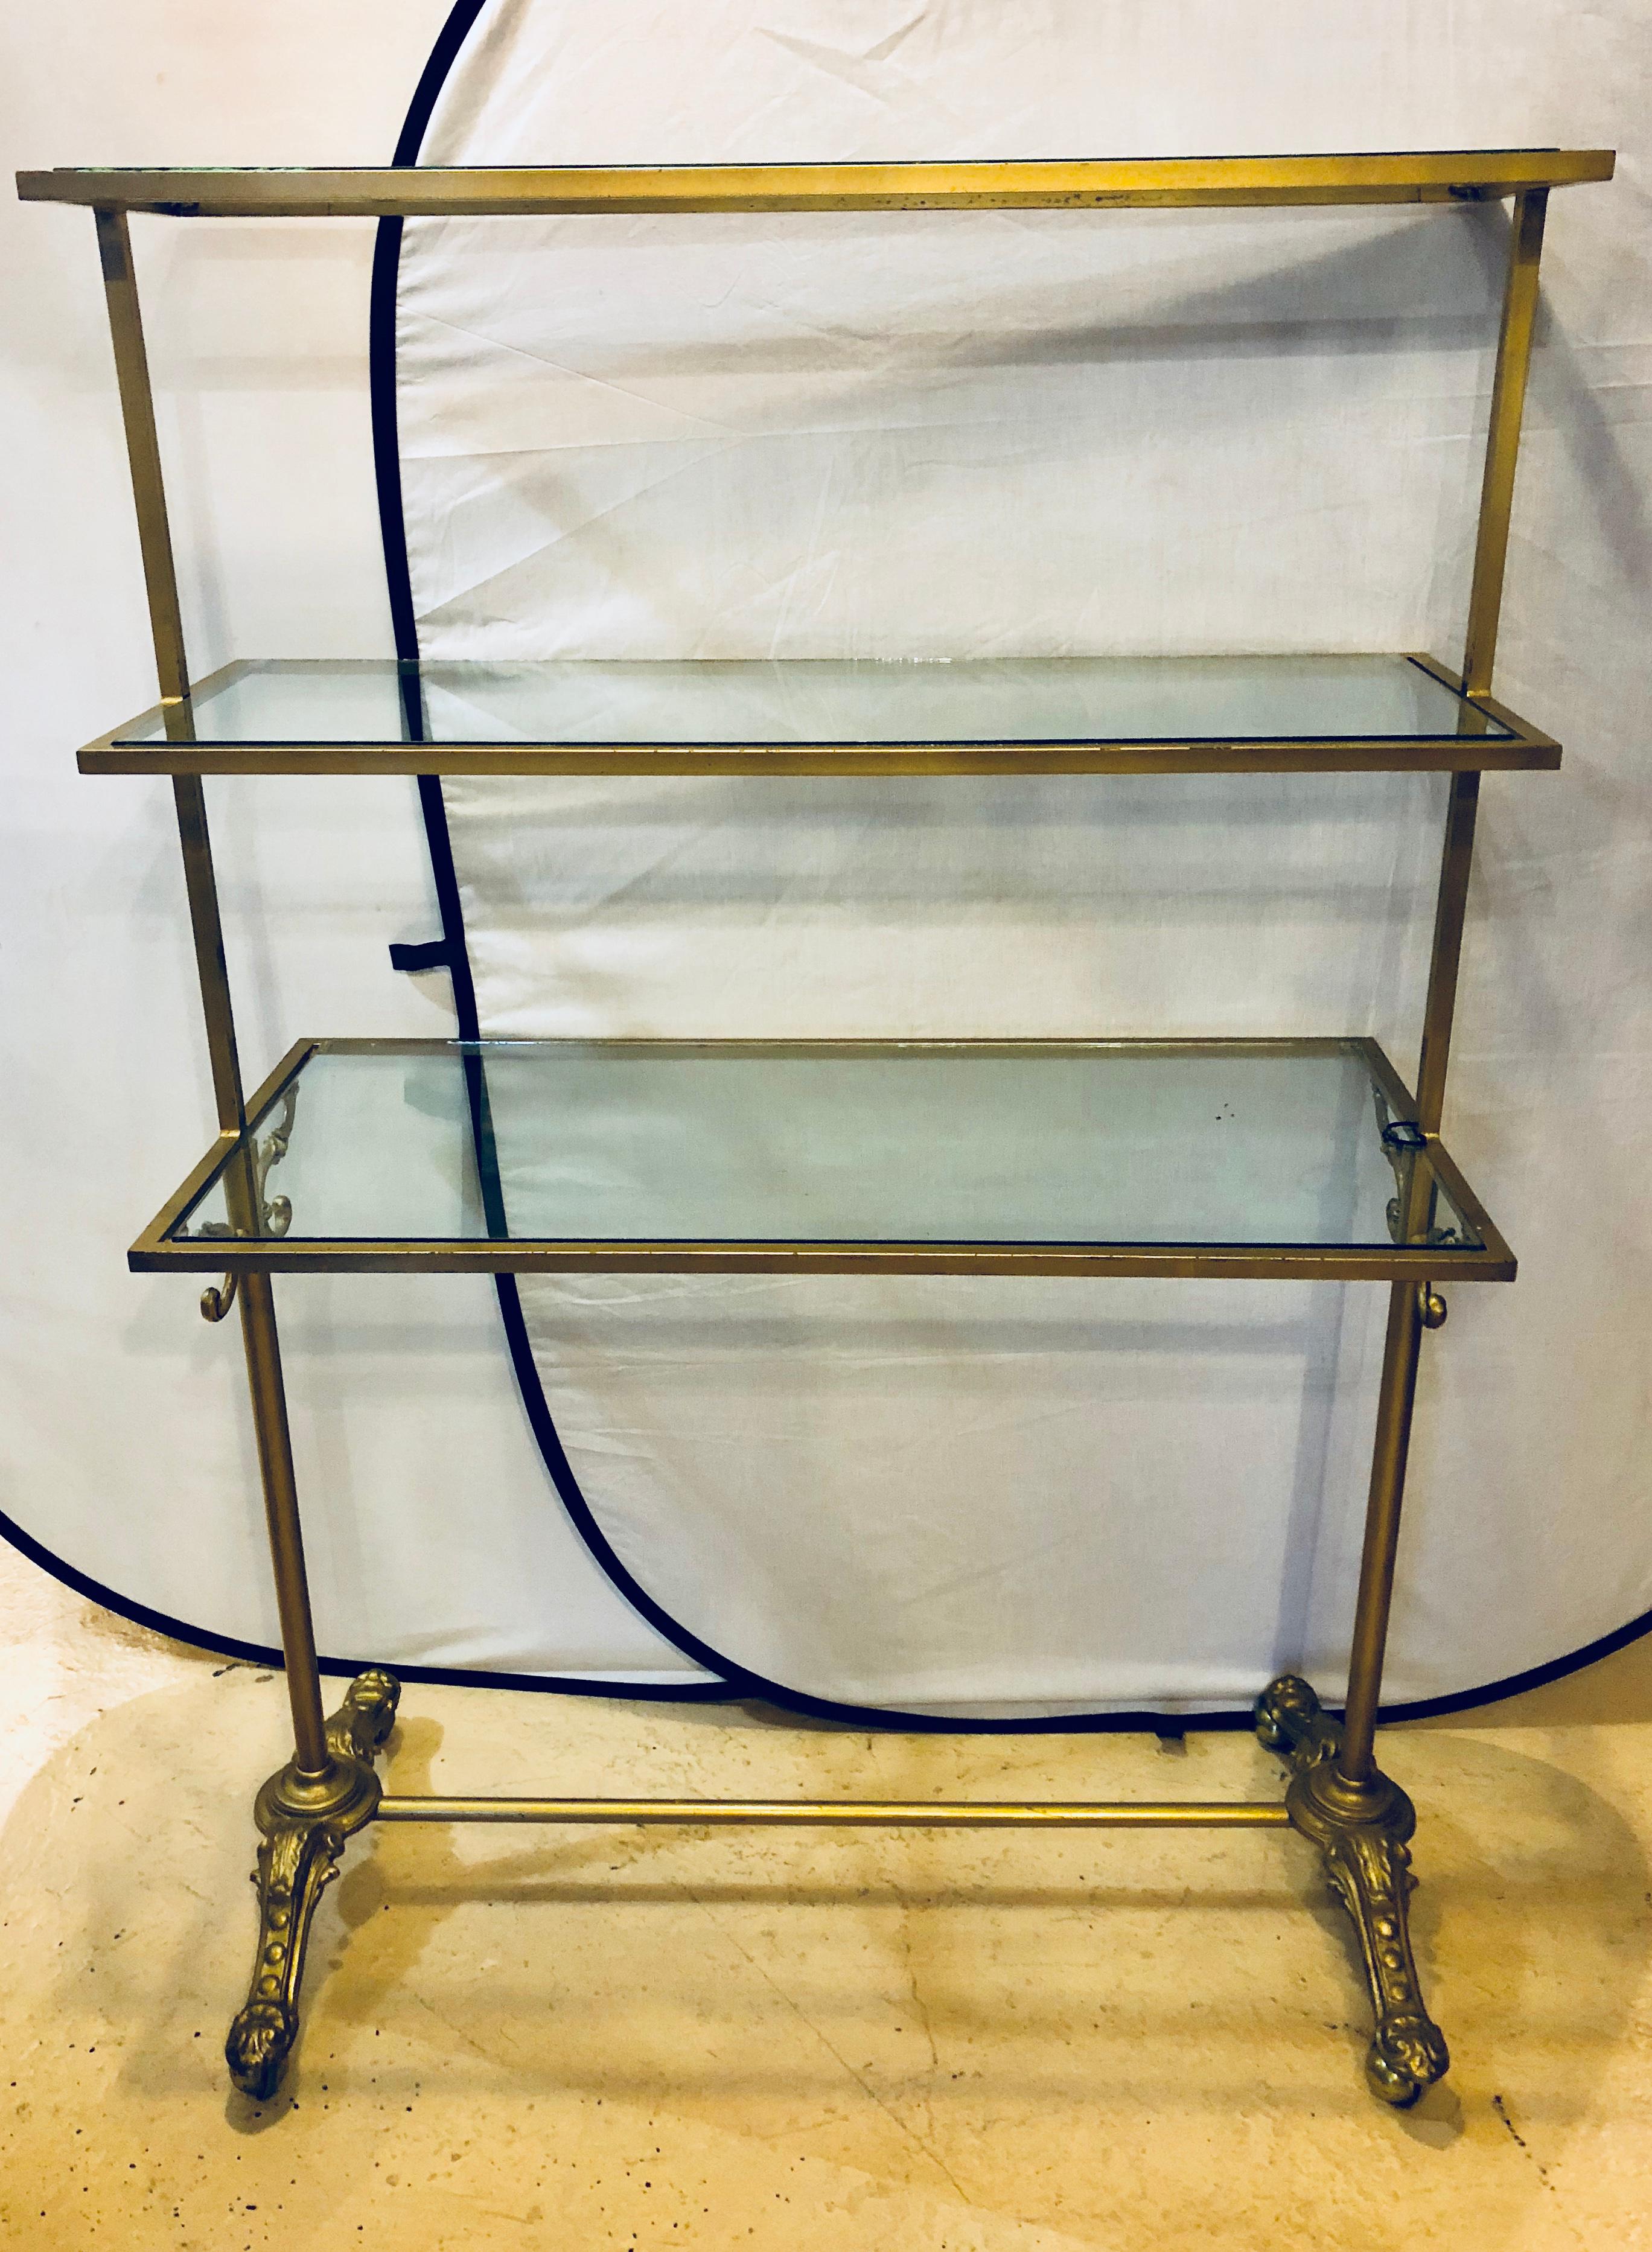 A Hollywood Regency three-tier large bakers rack gilt metal and glass shelves. A large and impressive bakers rack that is certain to add years of style and grace as well as serving a purpose to any kitchen or dining serving room in the home. 

ZXX.